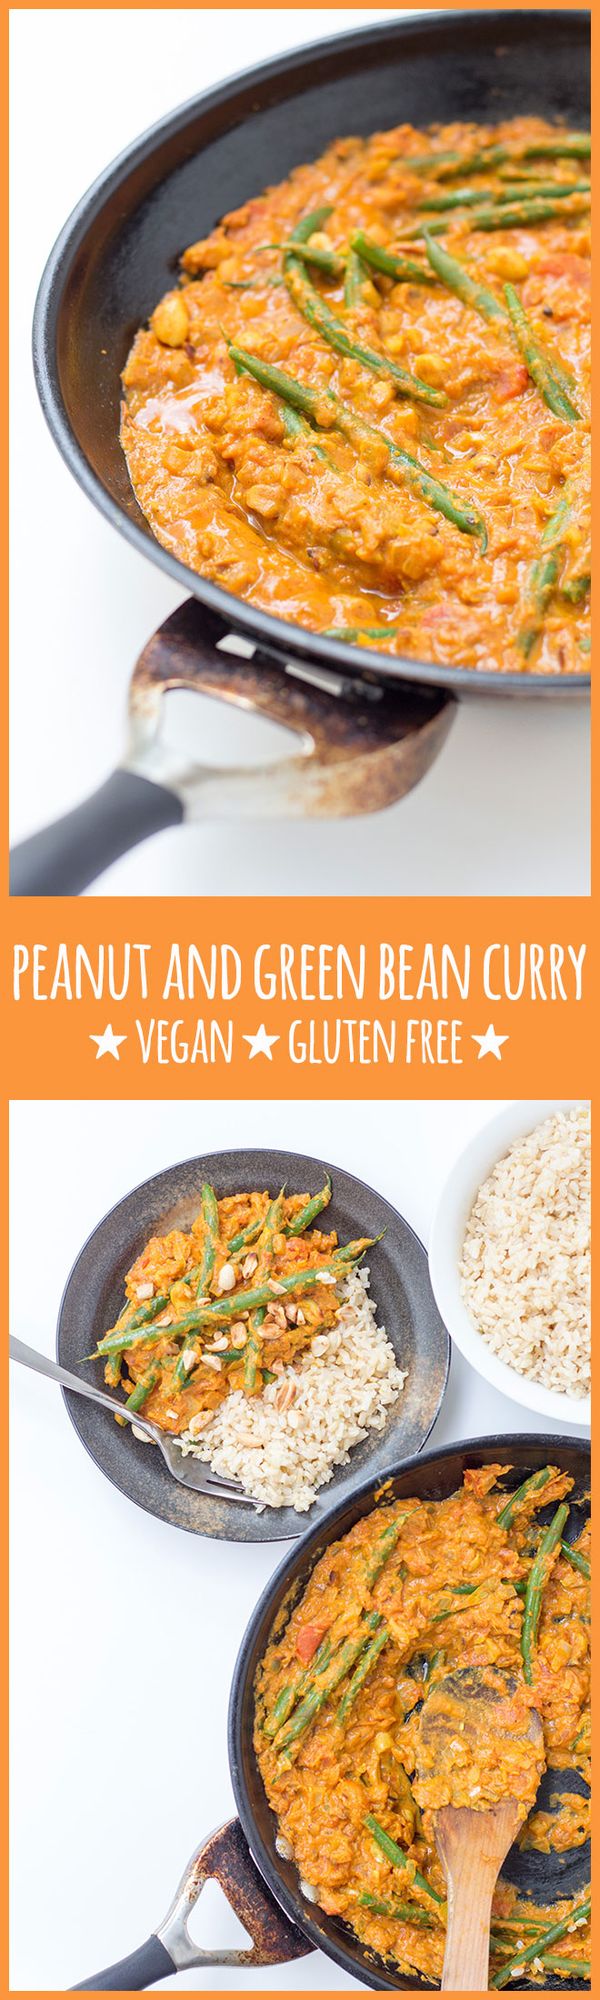 Peanut and green bean curry